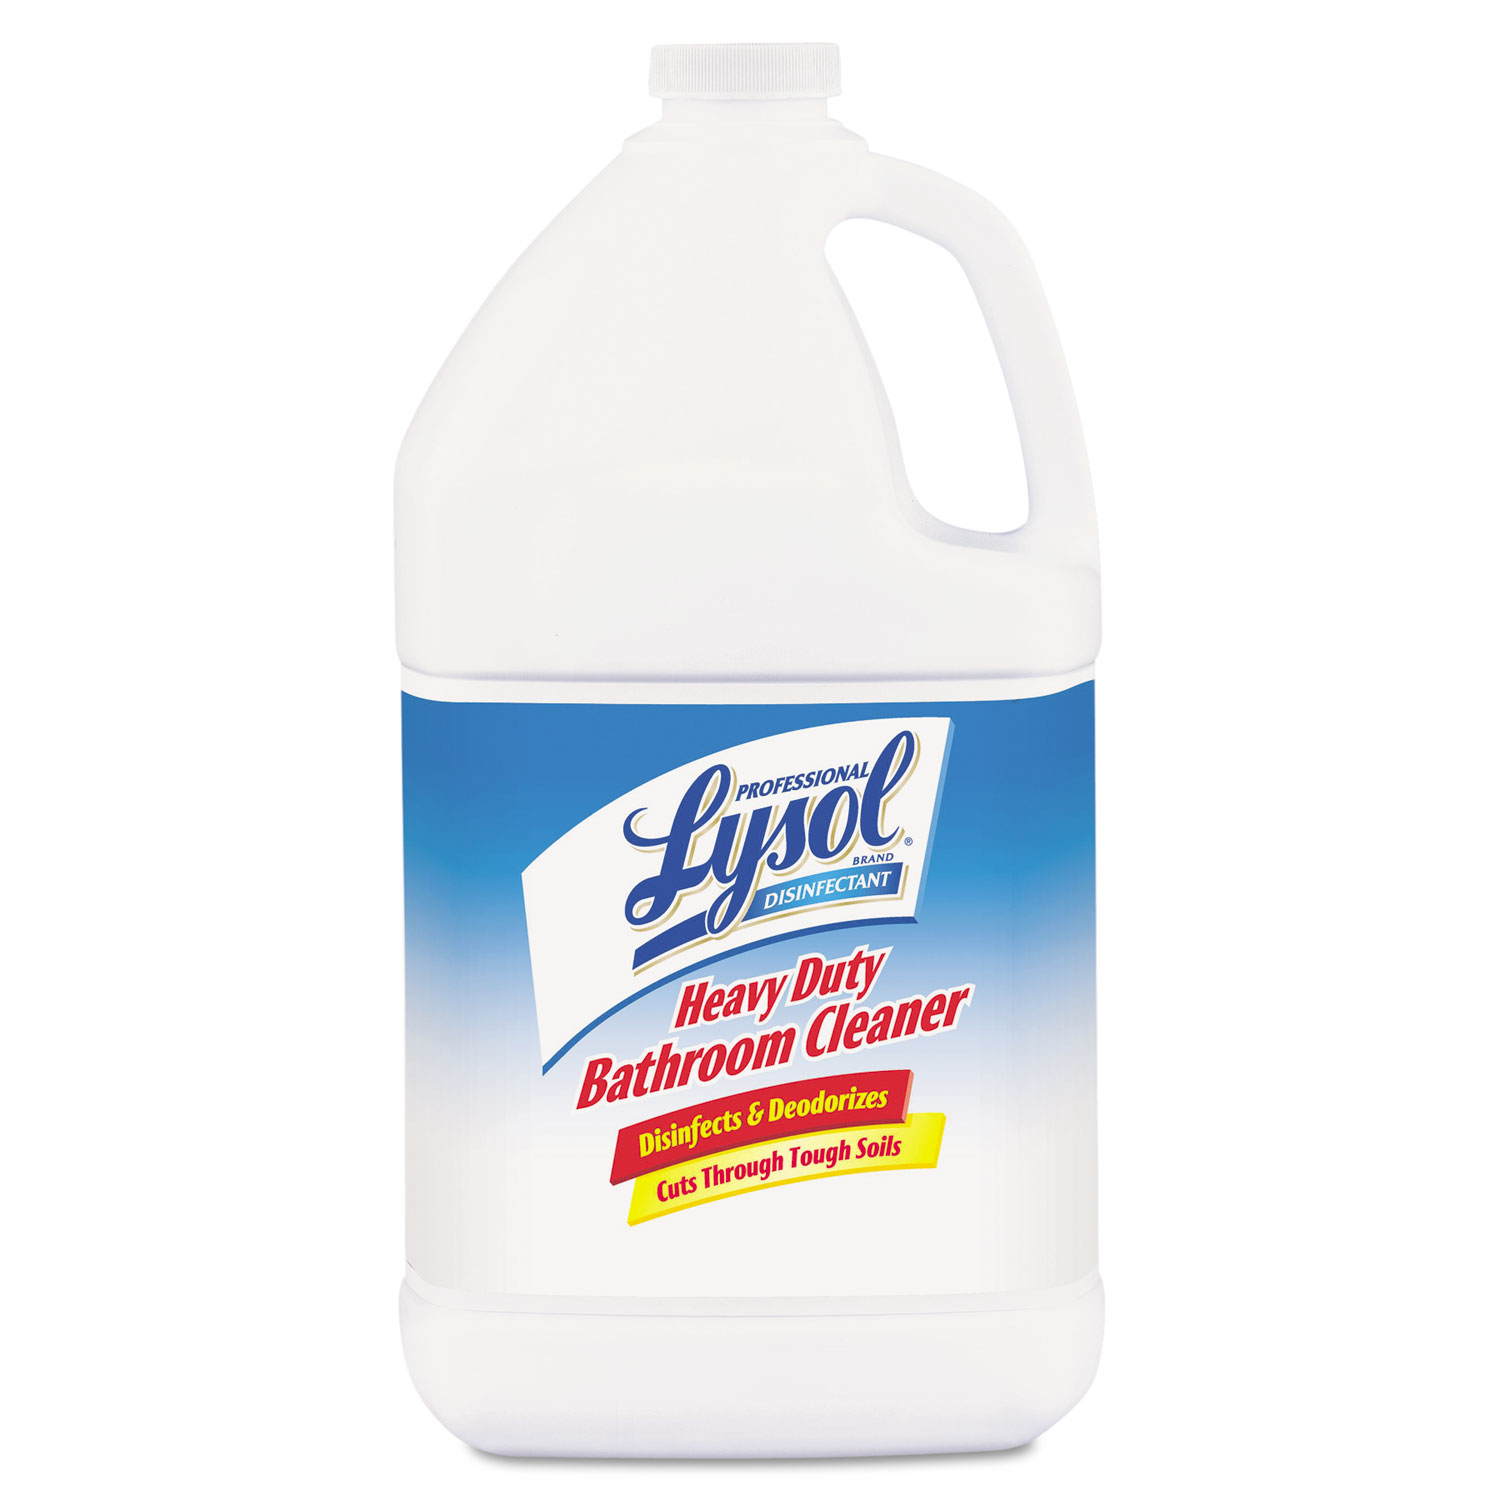  Professional LYSOL Brand 36241-94201 Disinfectant Heavy-Duty Bathroom Cleaner Concentrate, 1 gal Bottles, 4/Carton (RAC94201CT) 